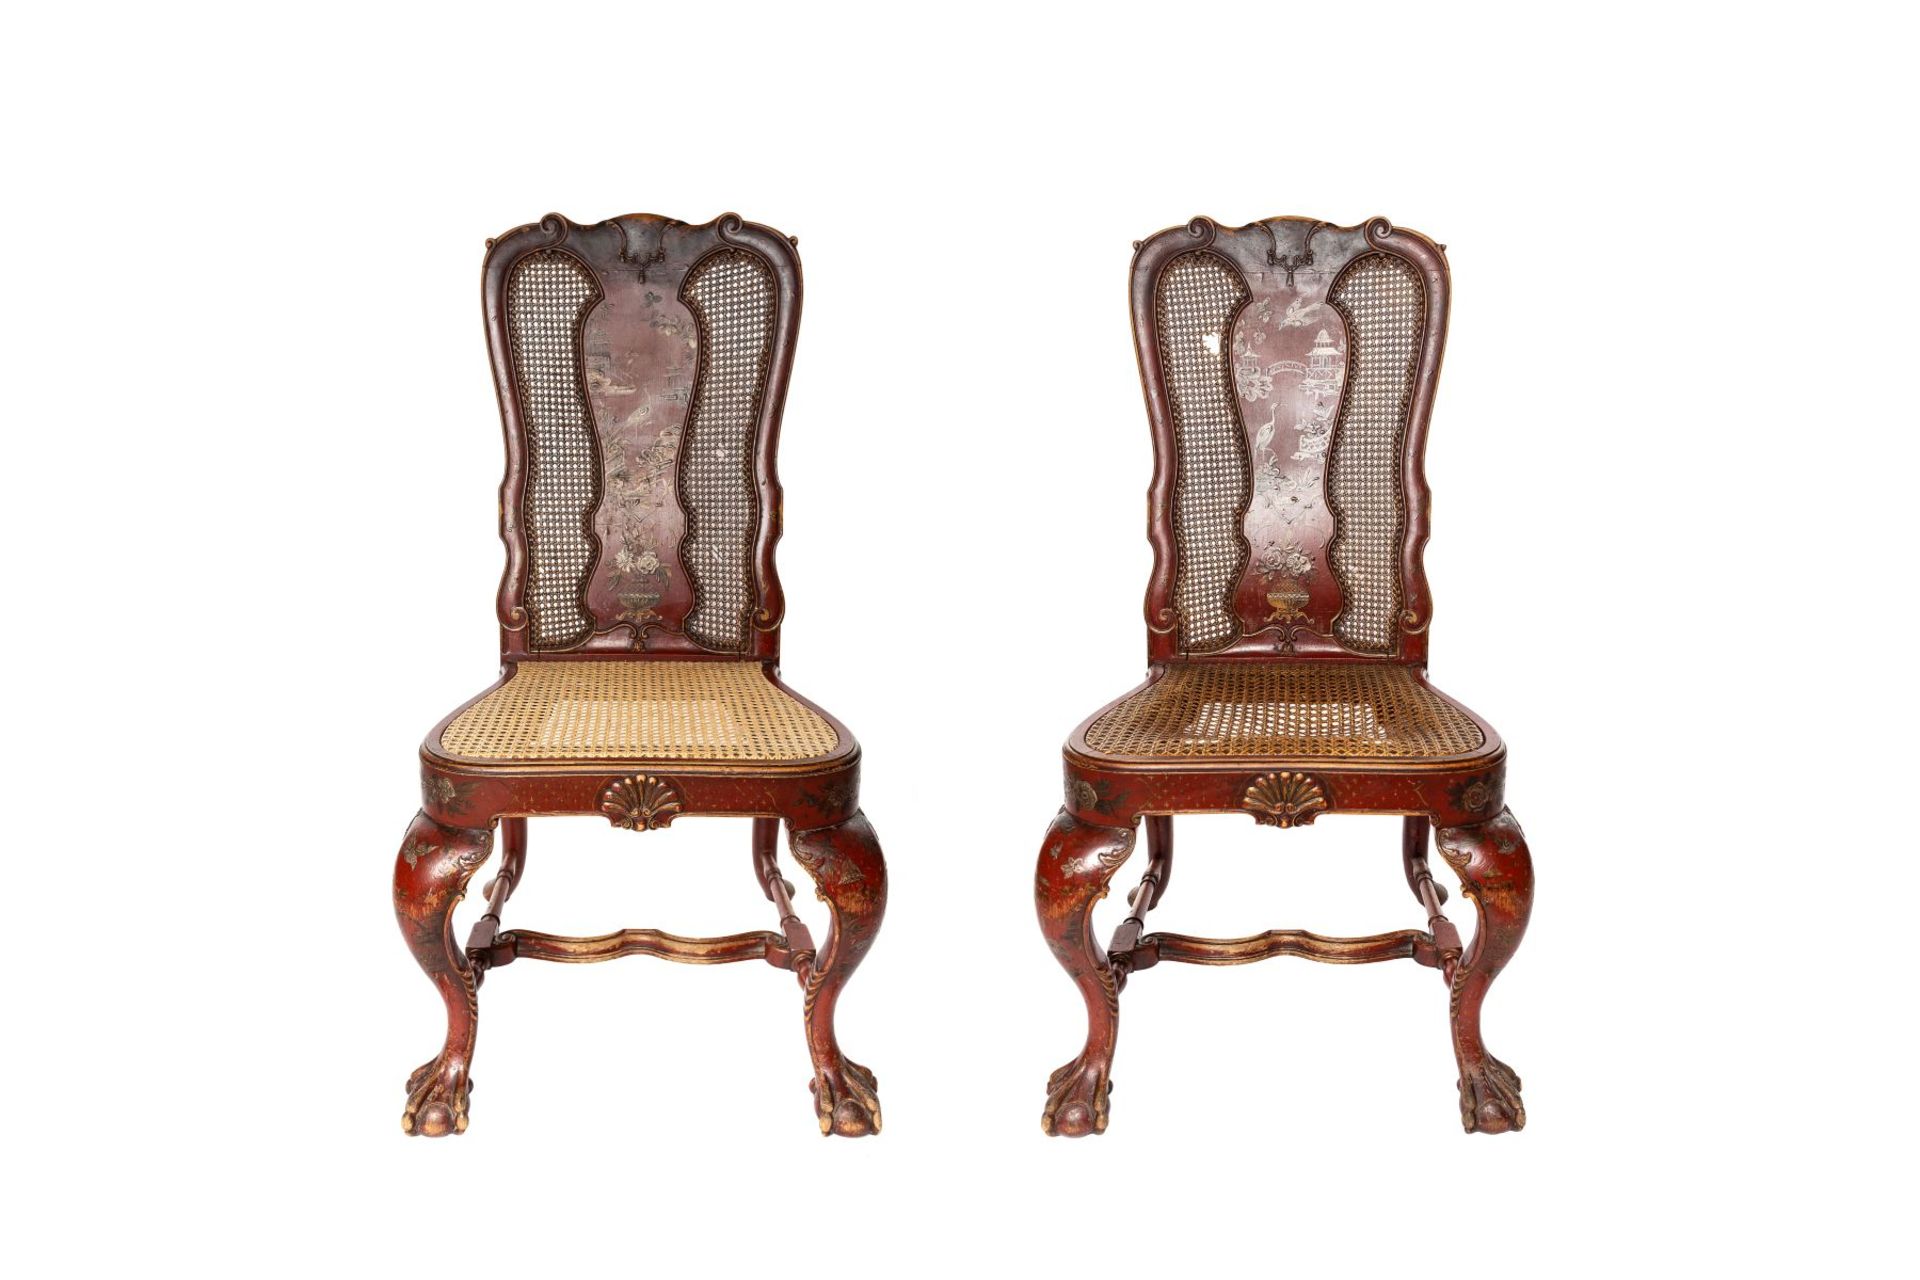 2 Chinese Chairs | 2 chinesische Stuehle